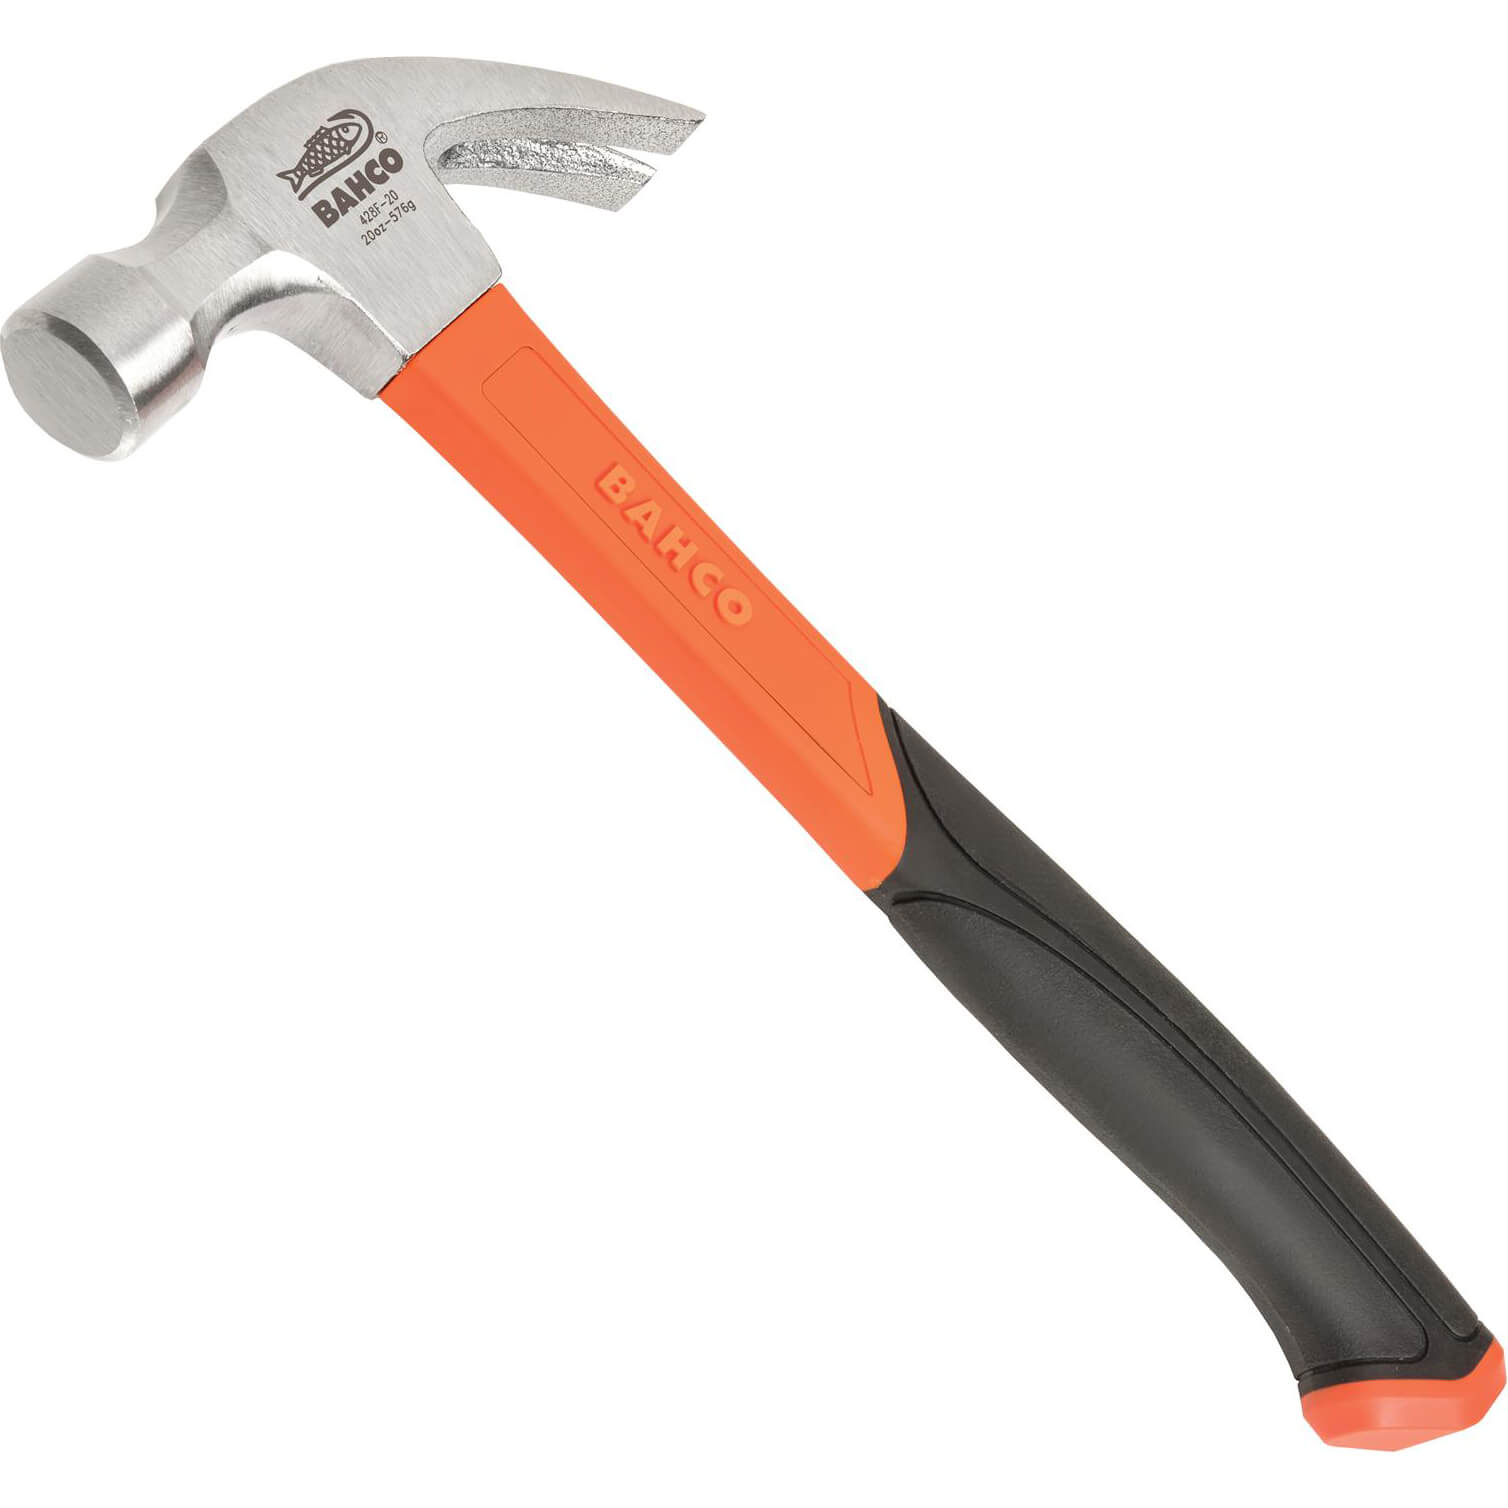 Image of Bahco 428 Curved Fibreglass Claw Hammer 570g